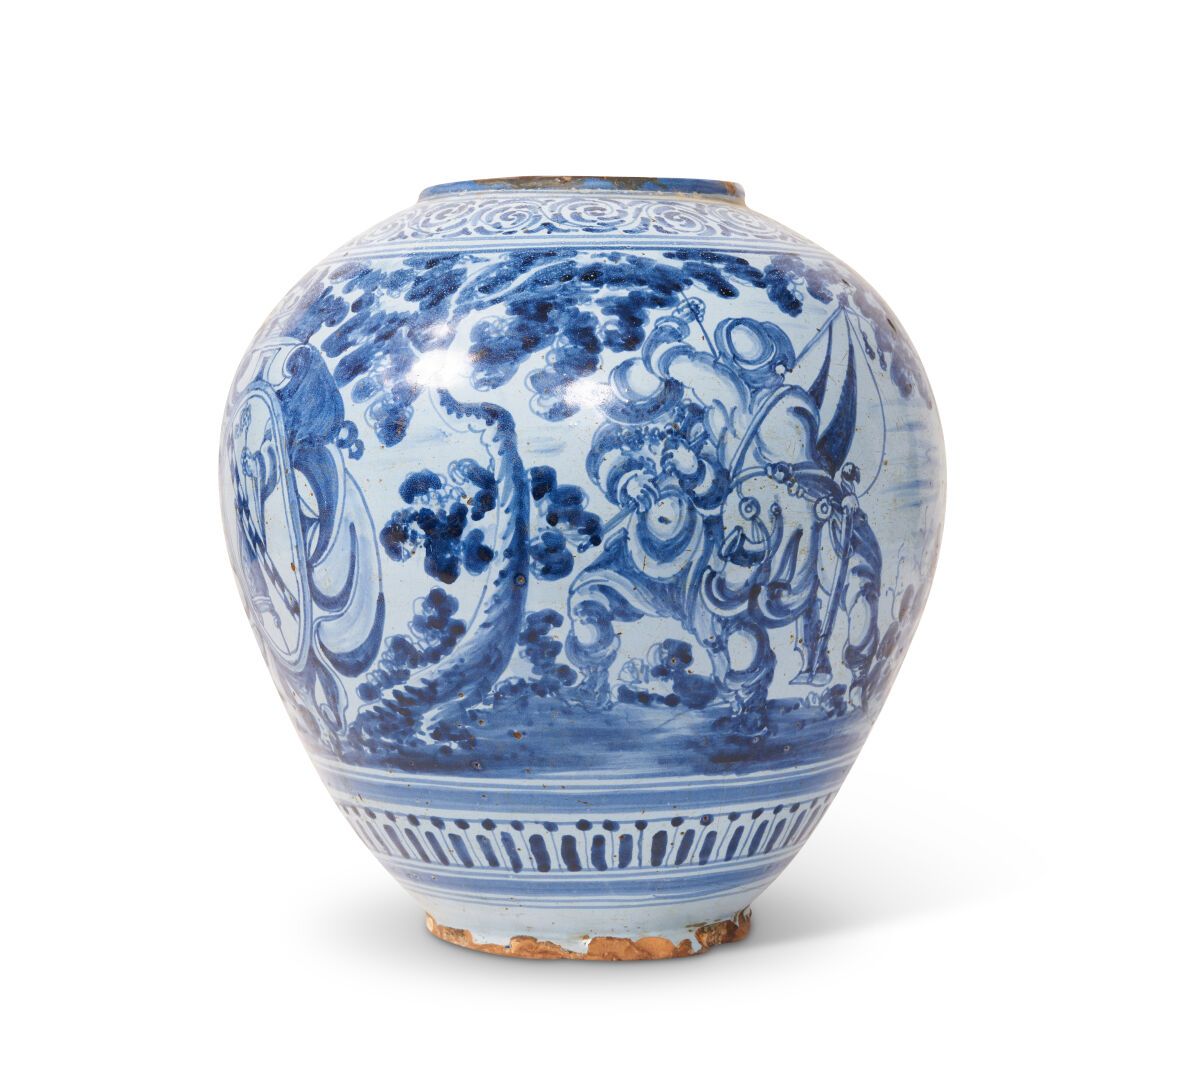 Null Northern Italy
Vase ball in majolica with decoration in blue monochrome on &hellip;